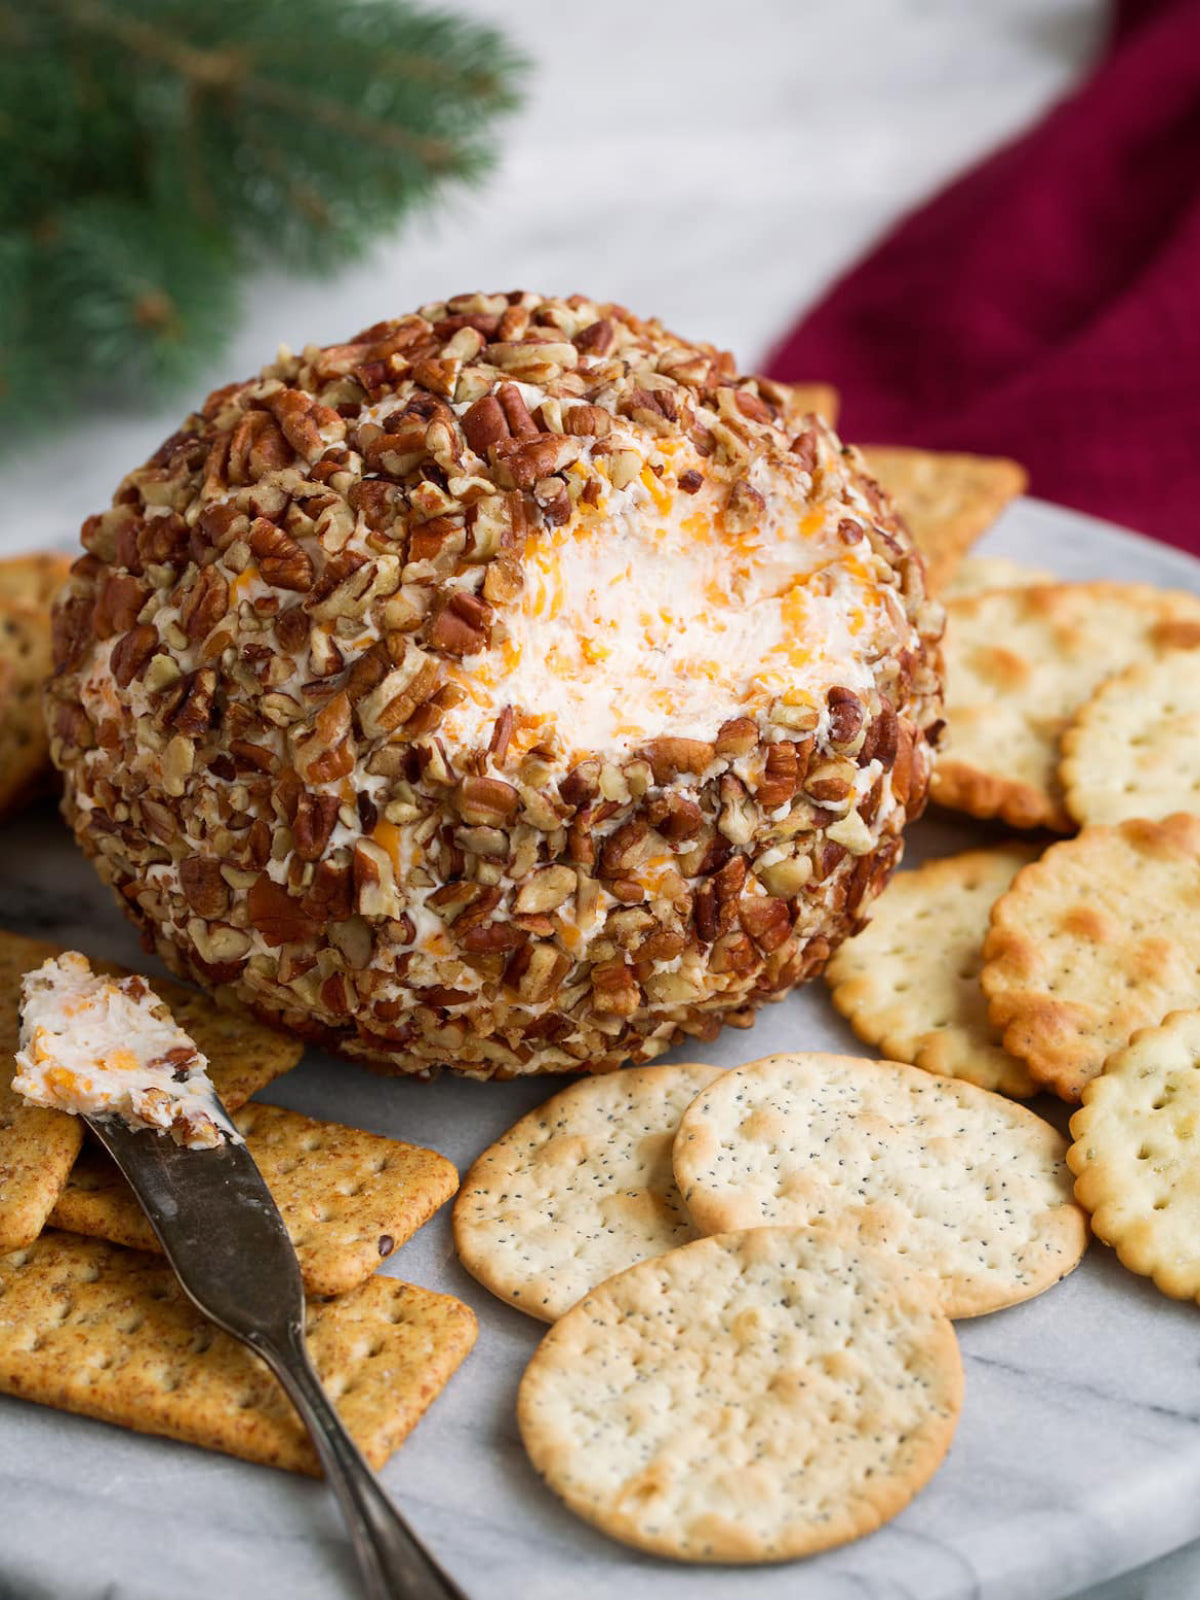 How to: Classic Cheese Balls